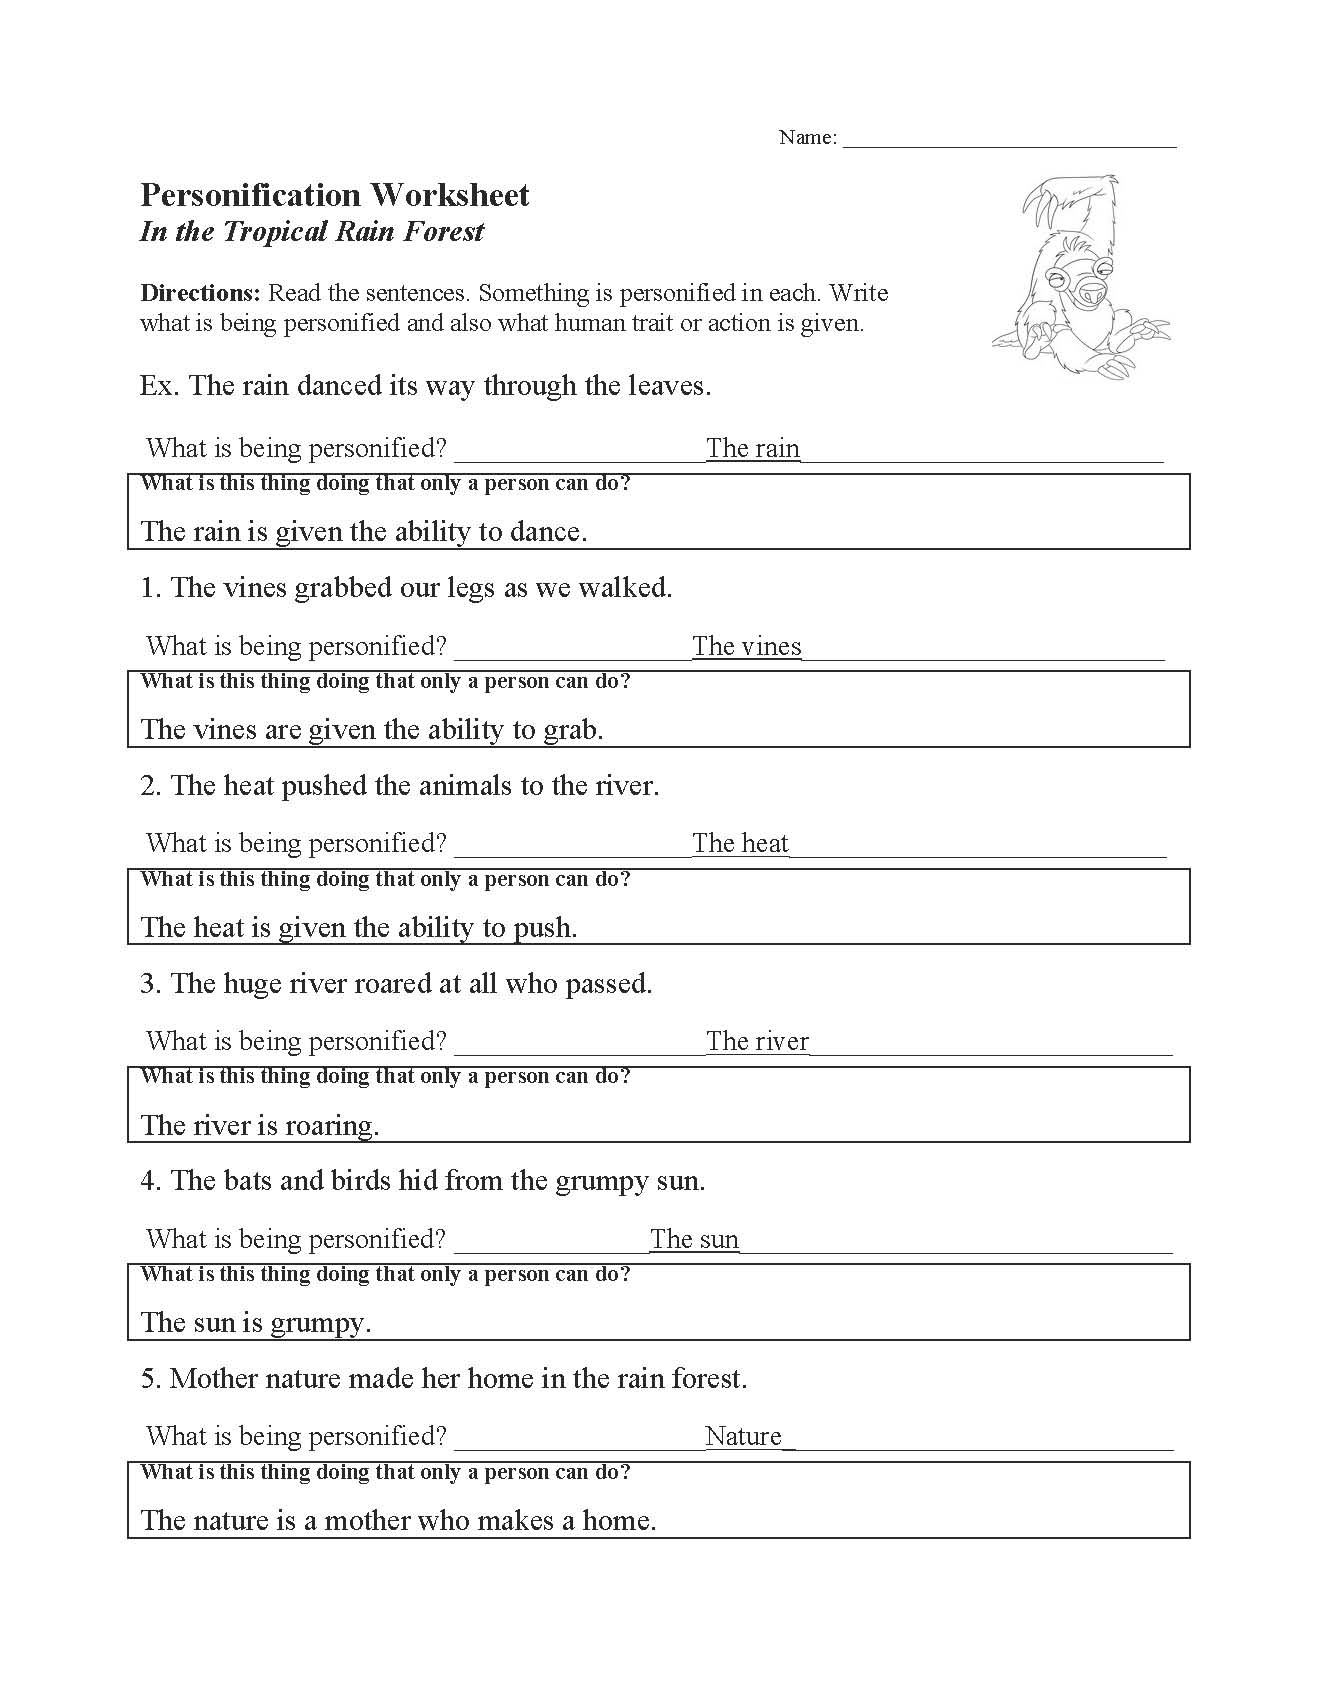 This is a preview image of our Personification Worksheet. Click on it to enlarge or view the source file.